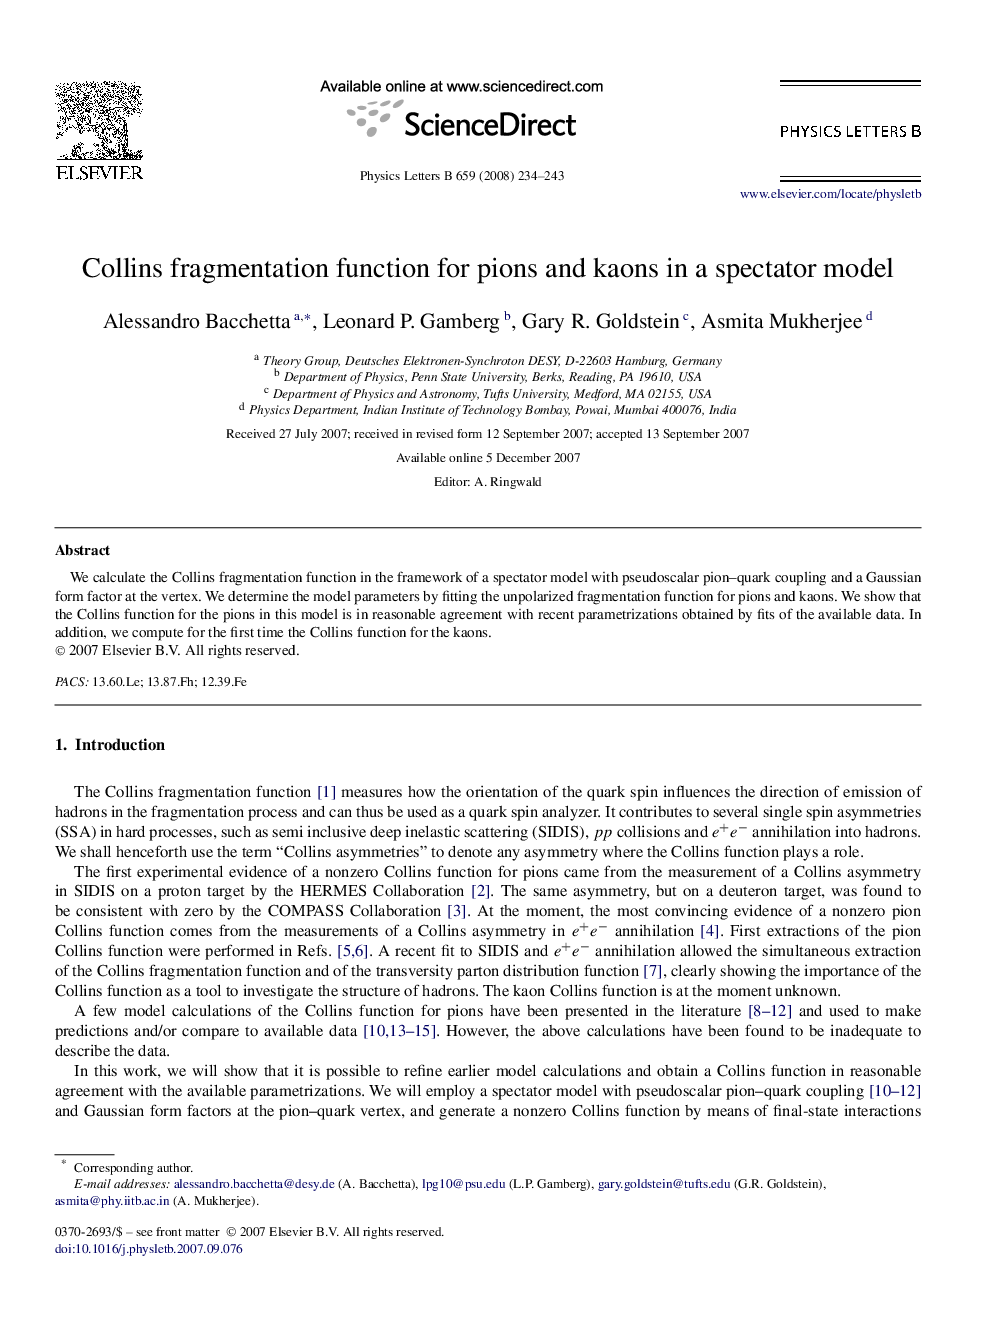 Collins fragmentation function for pions and kaons in a spectator model